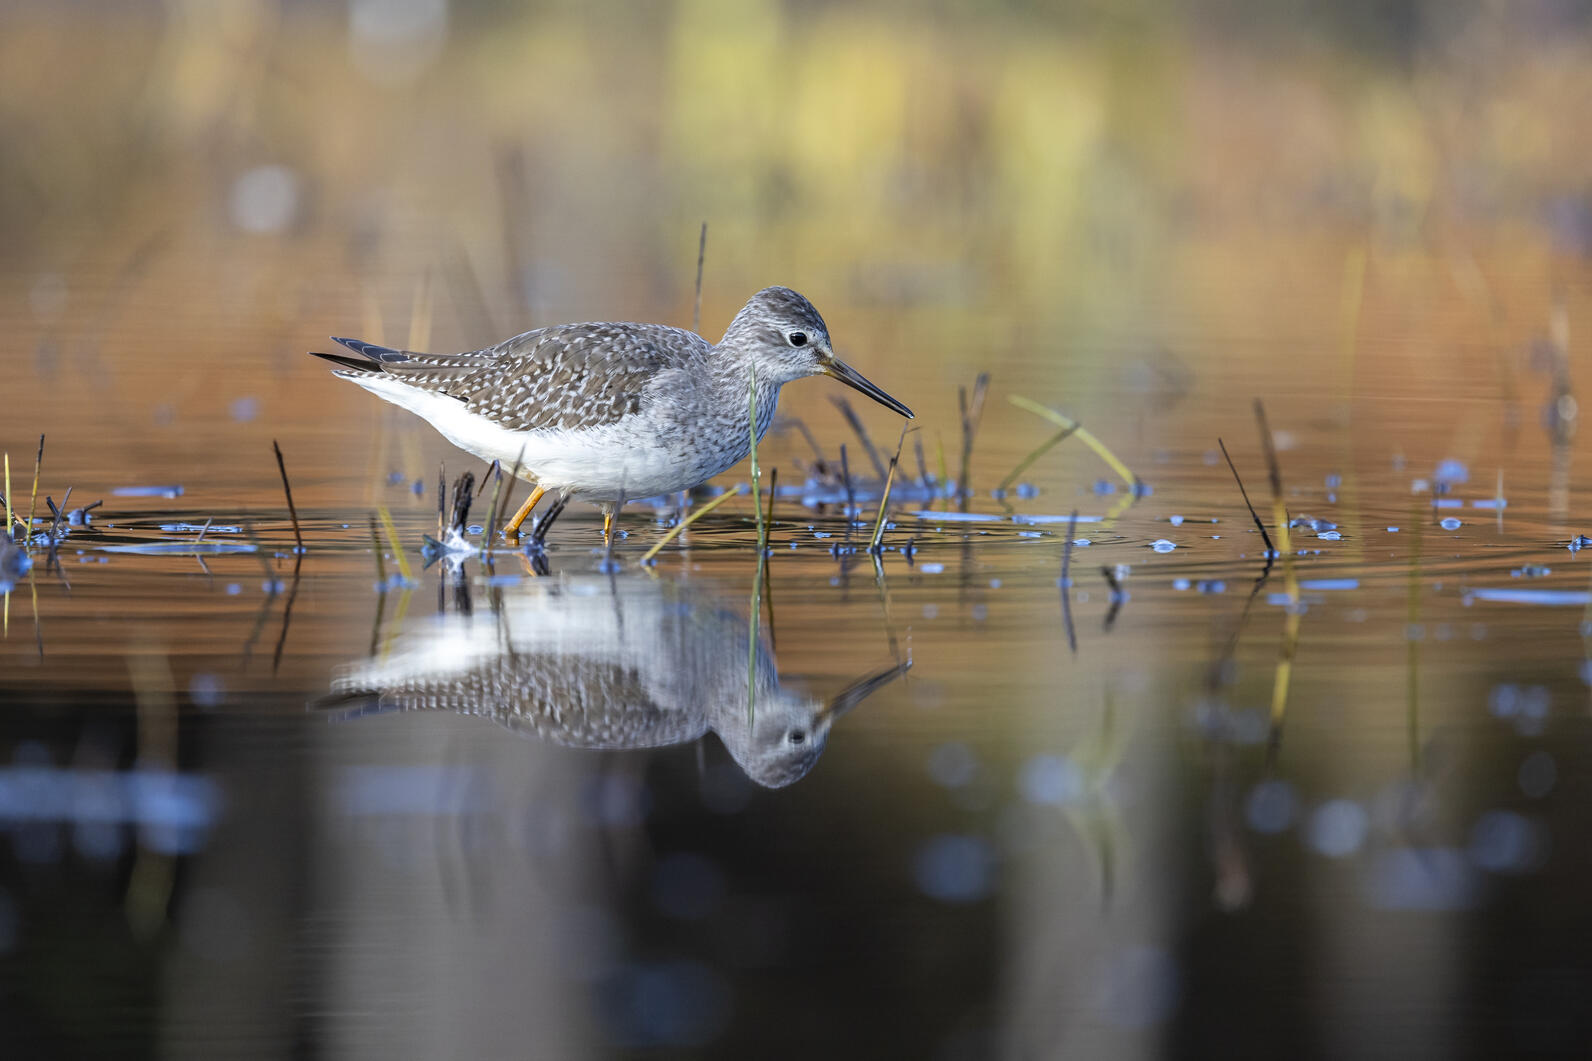 Yellowlegs searching through the marsh for food